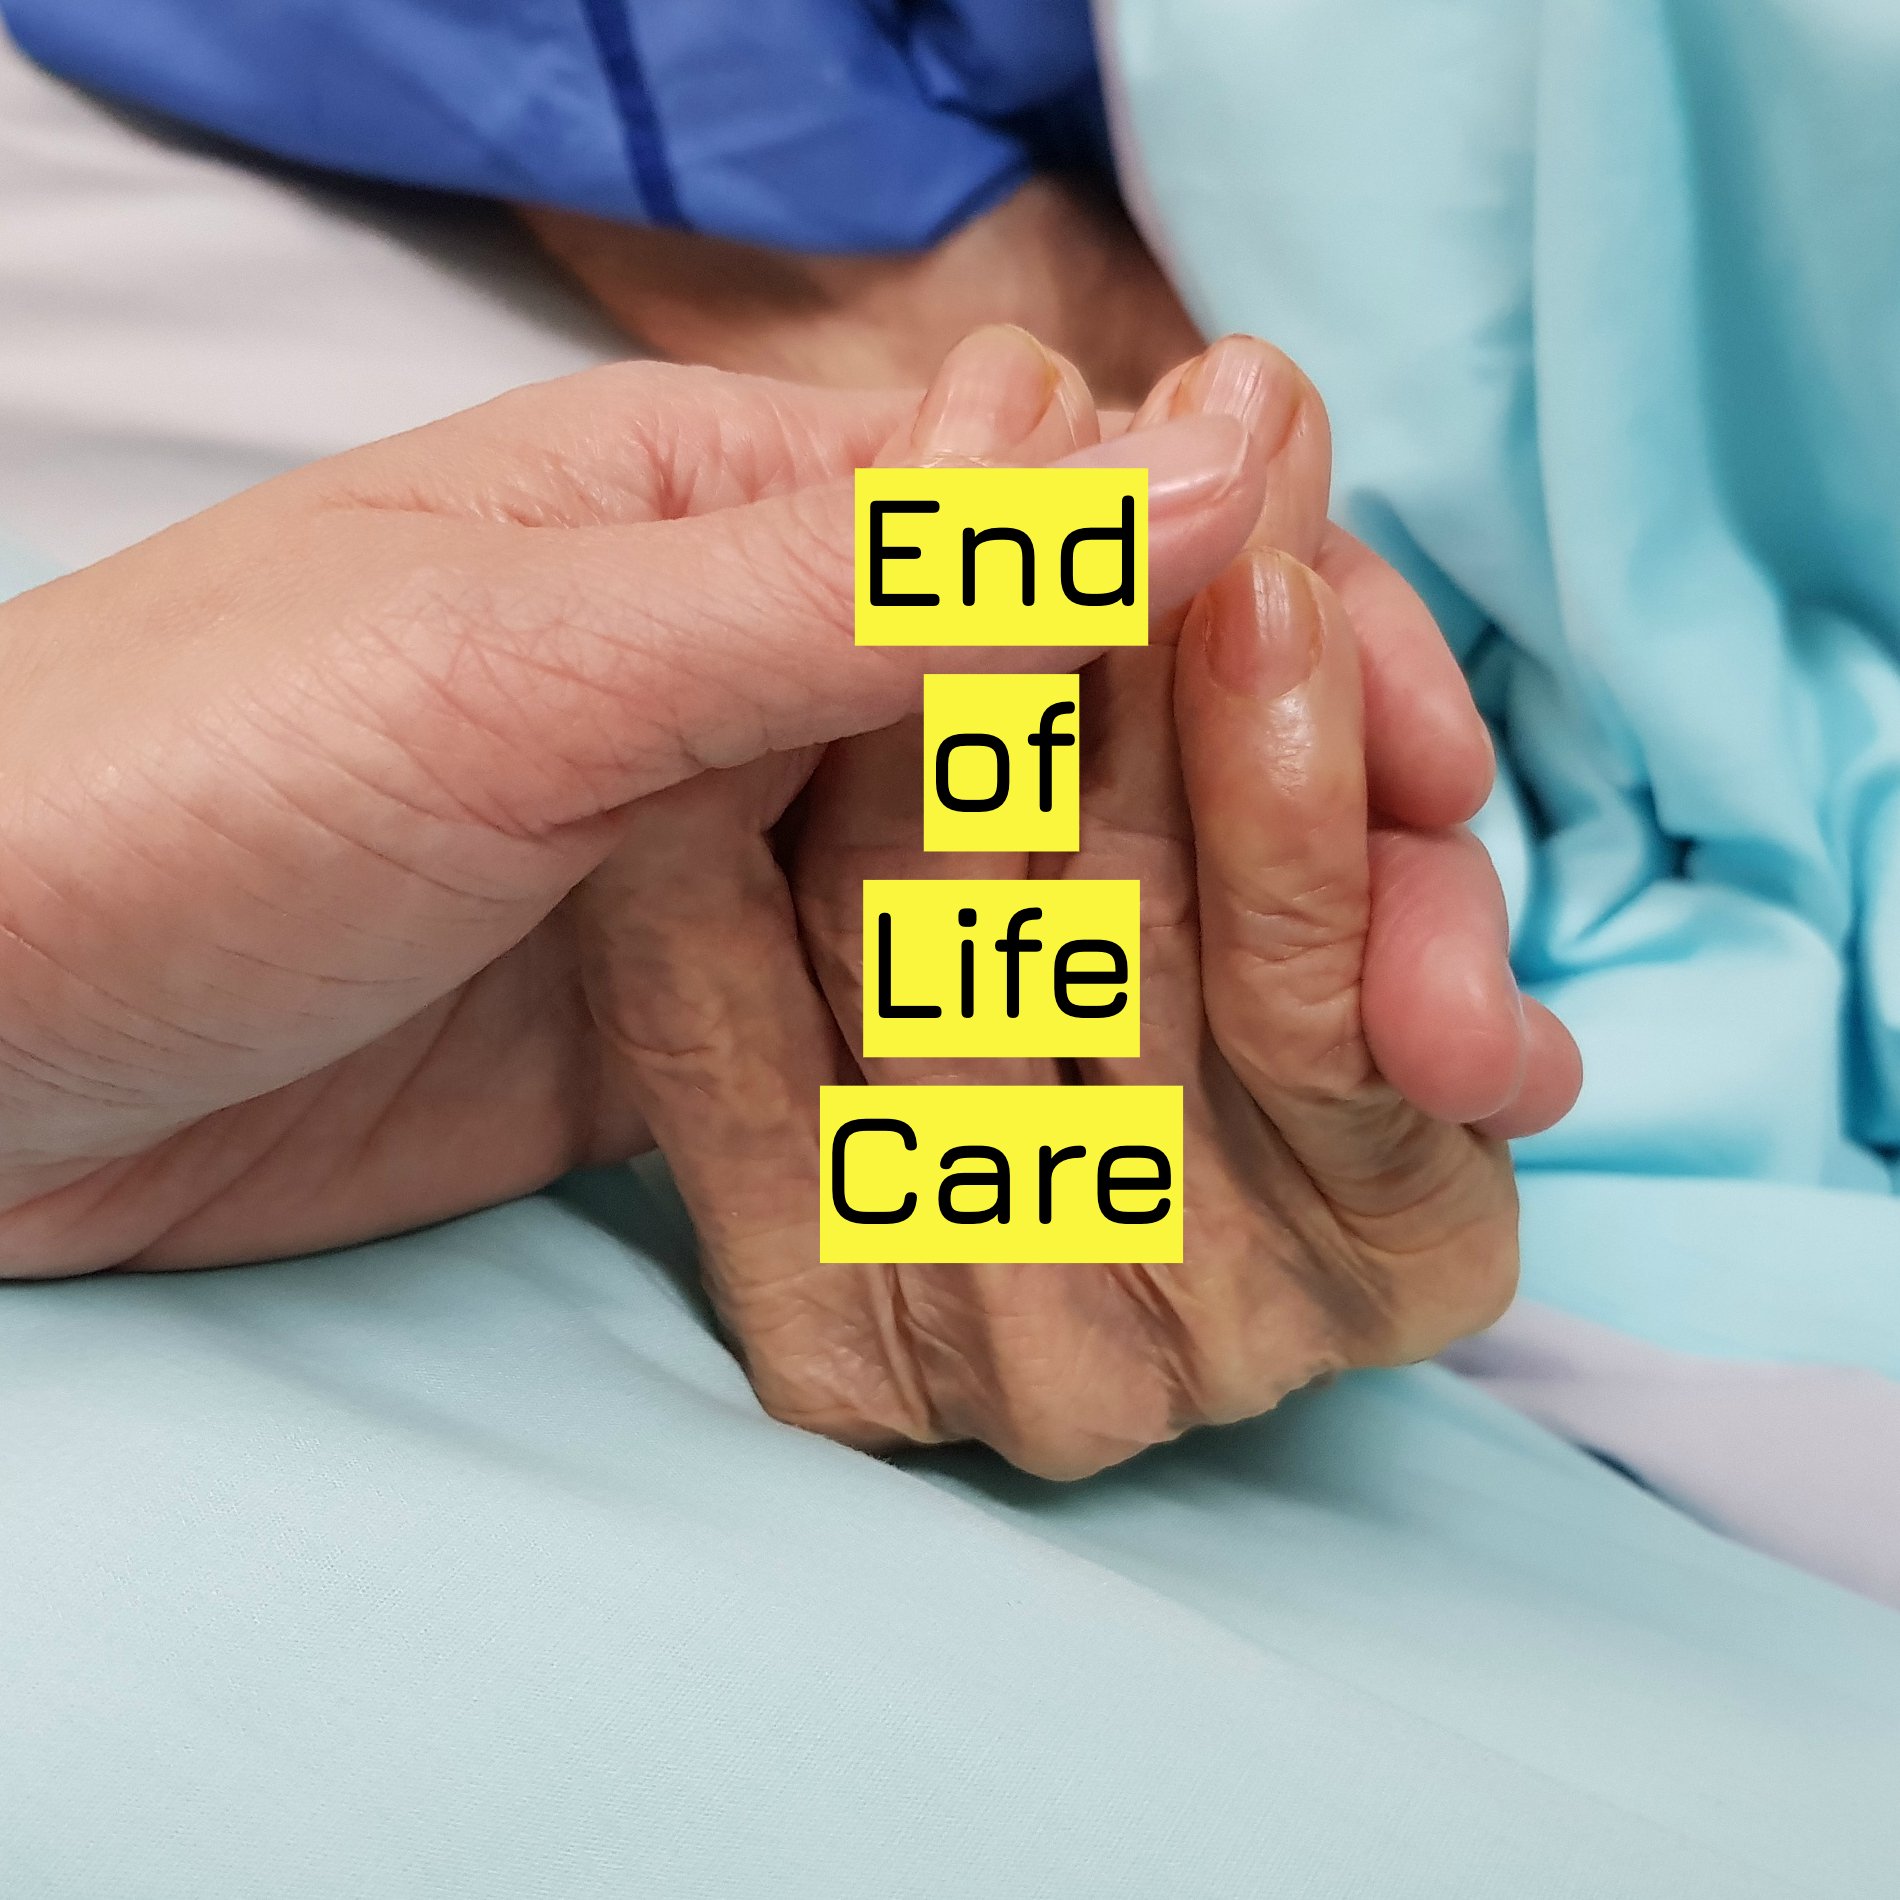 End of Life Care .jpg